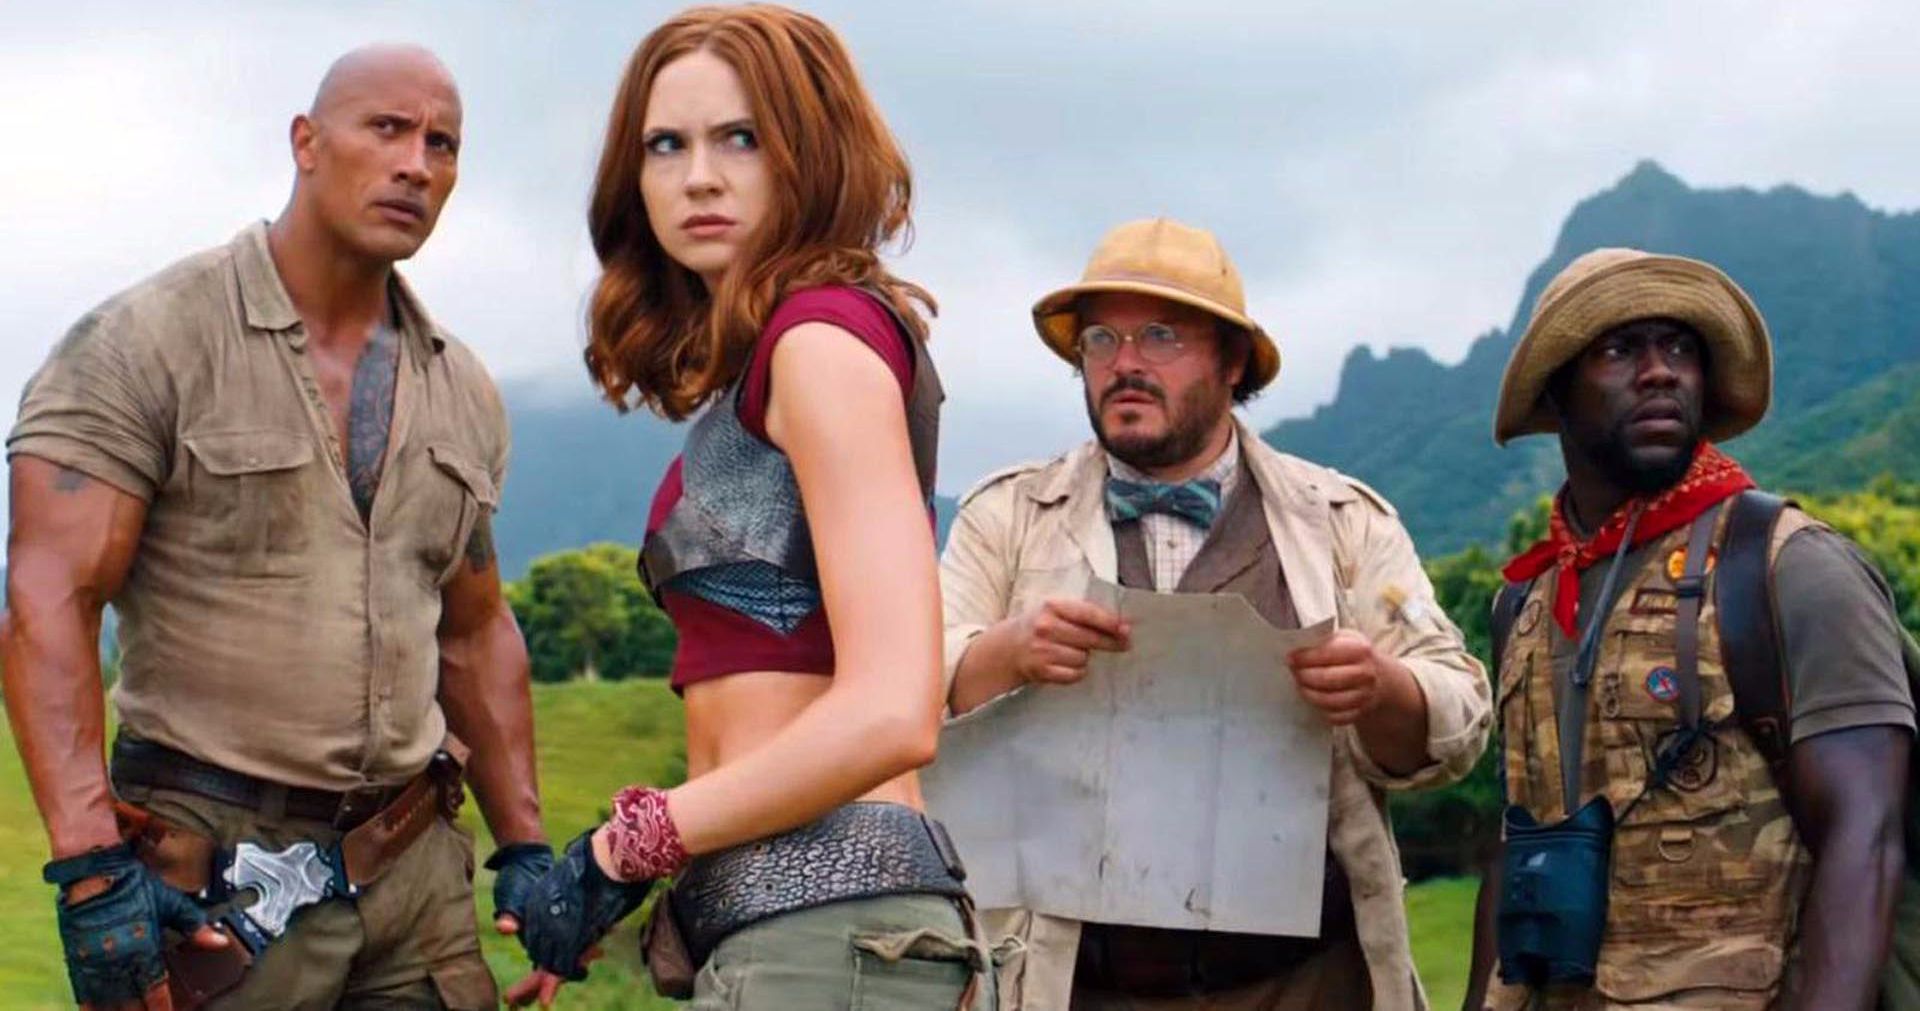 Jumanji 3 Title Possibly Leaks, Trailer Expected to Drop Soon